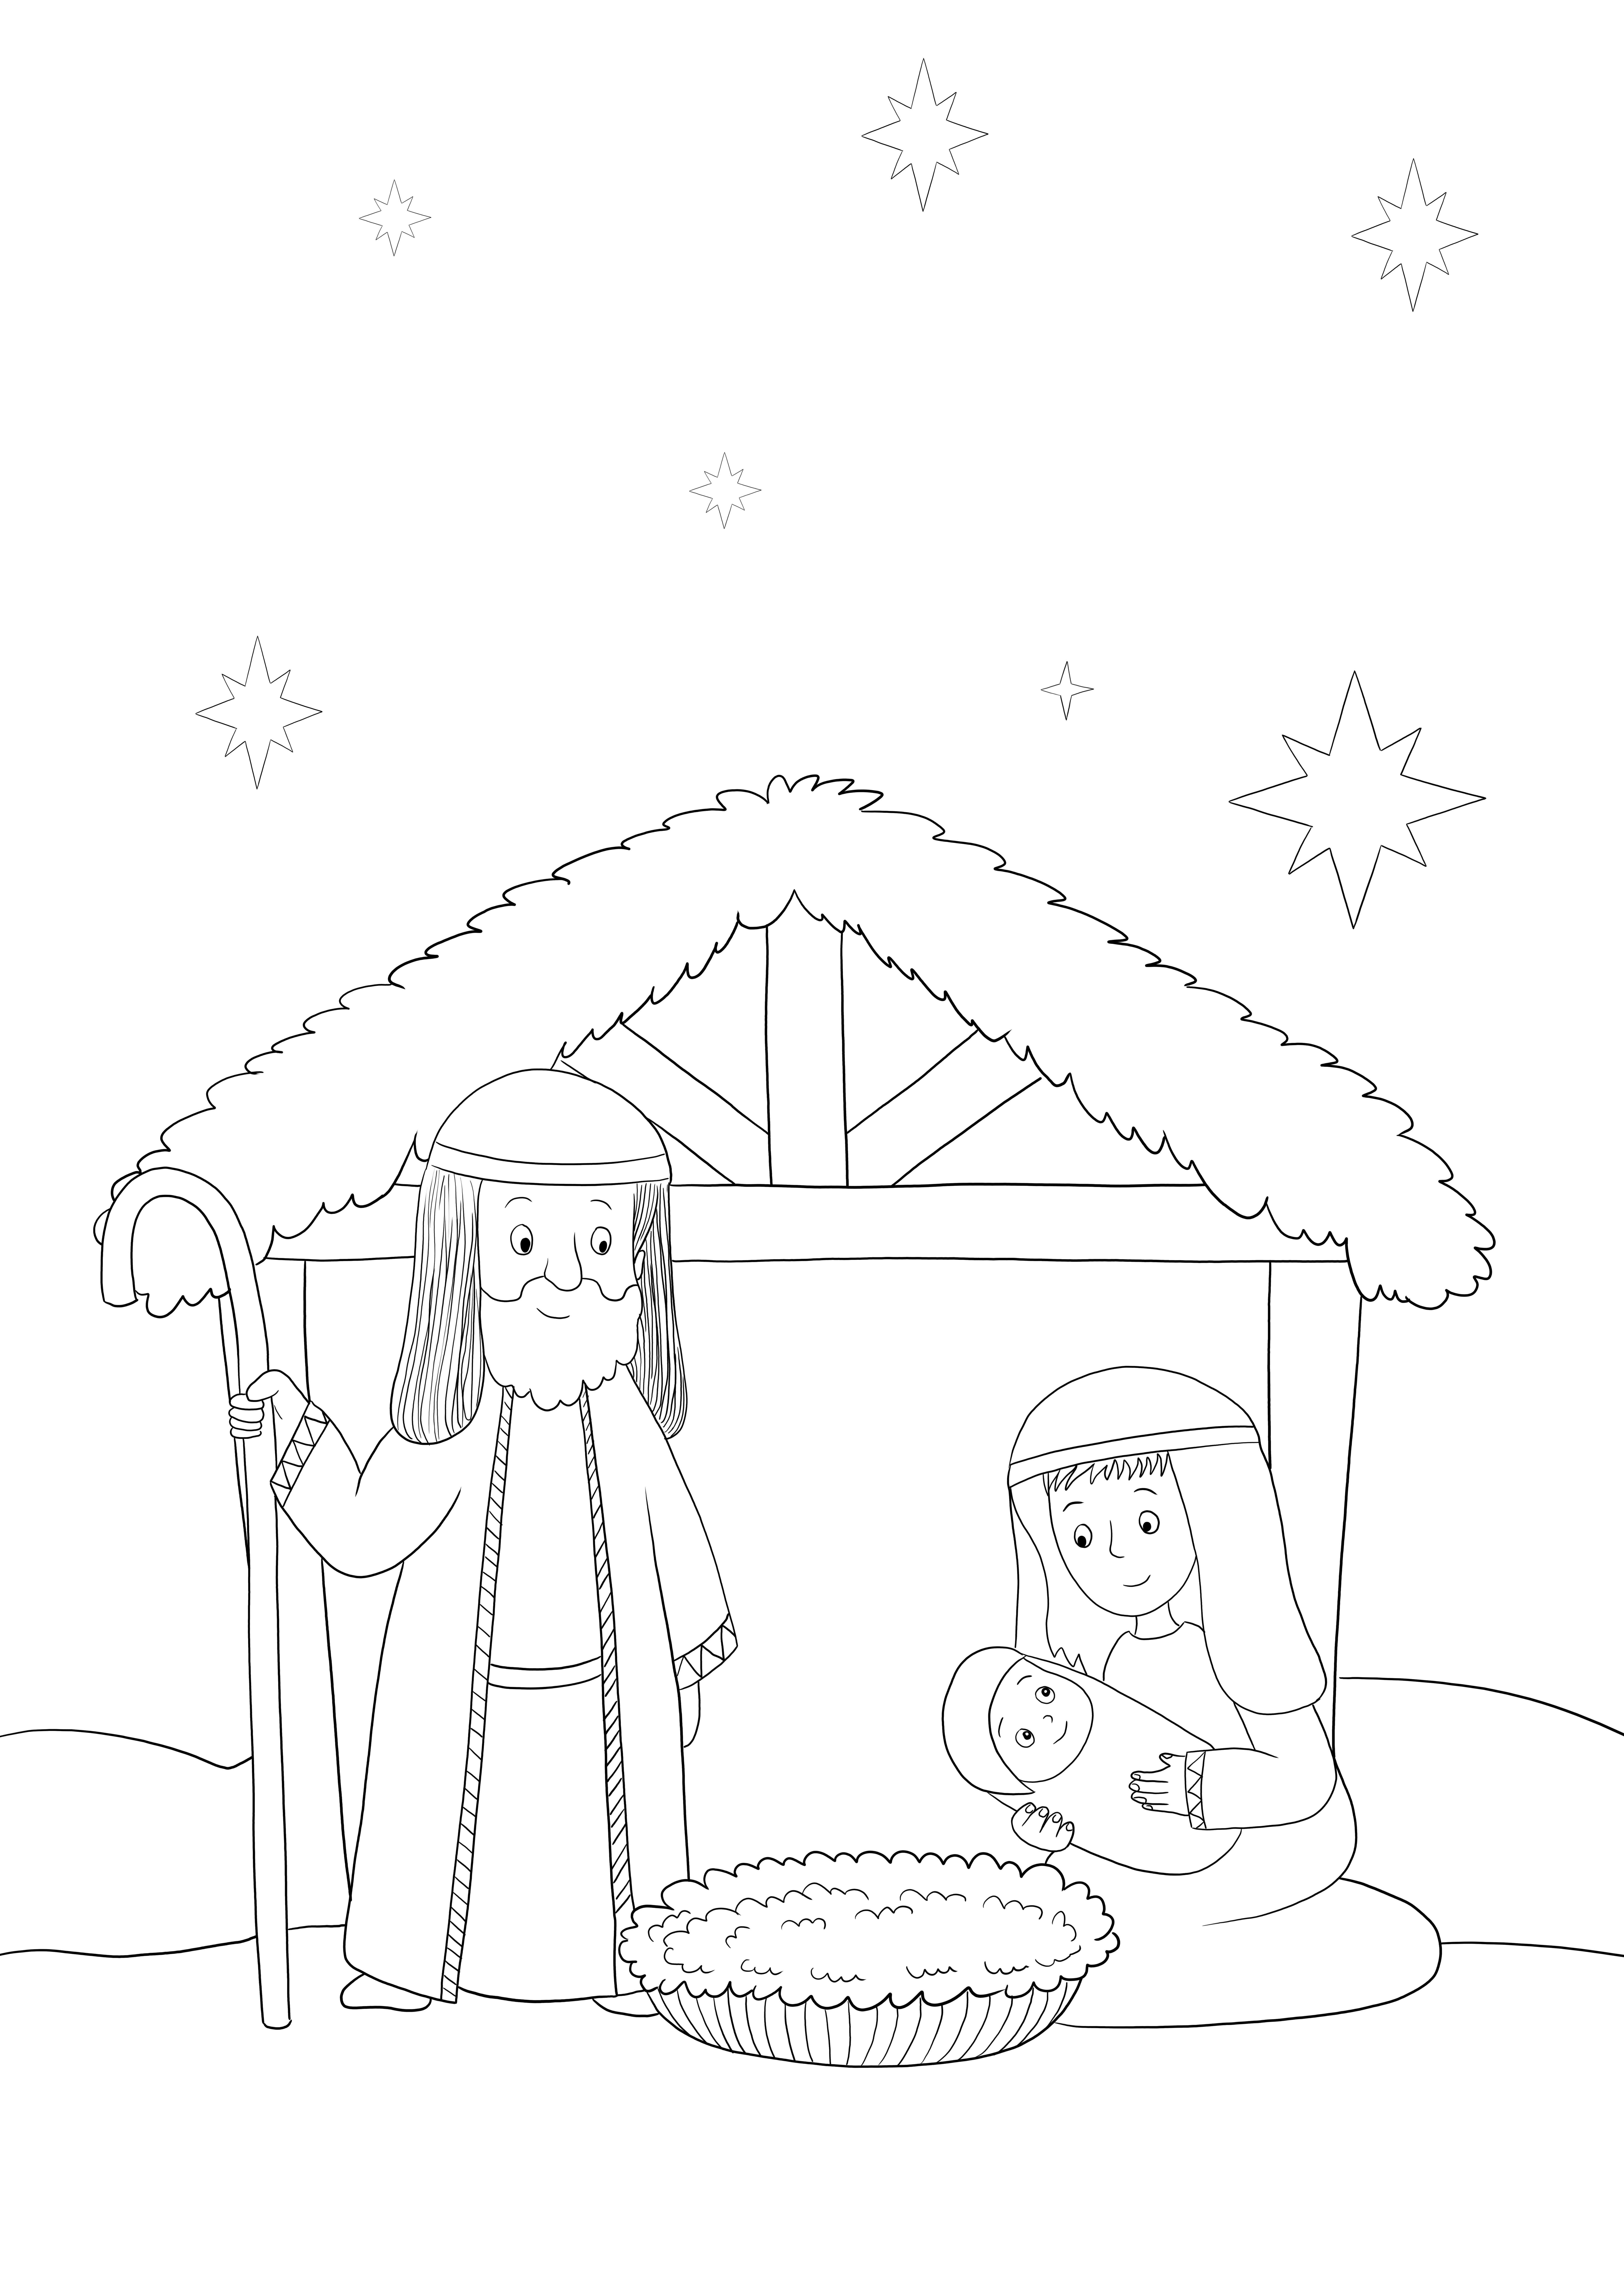 Nativity story free to print or download and color for kids